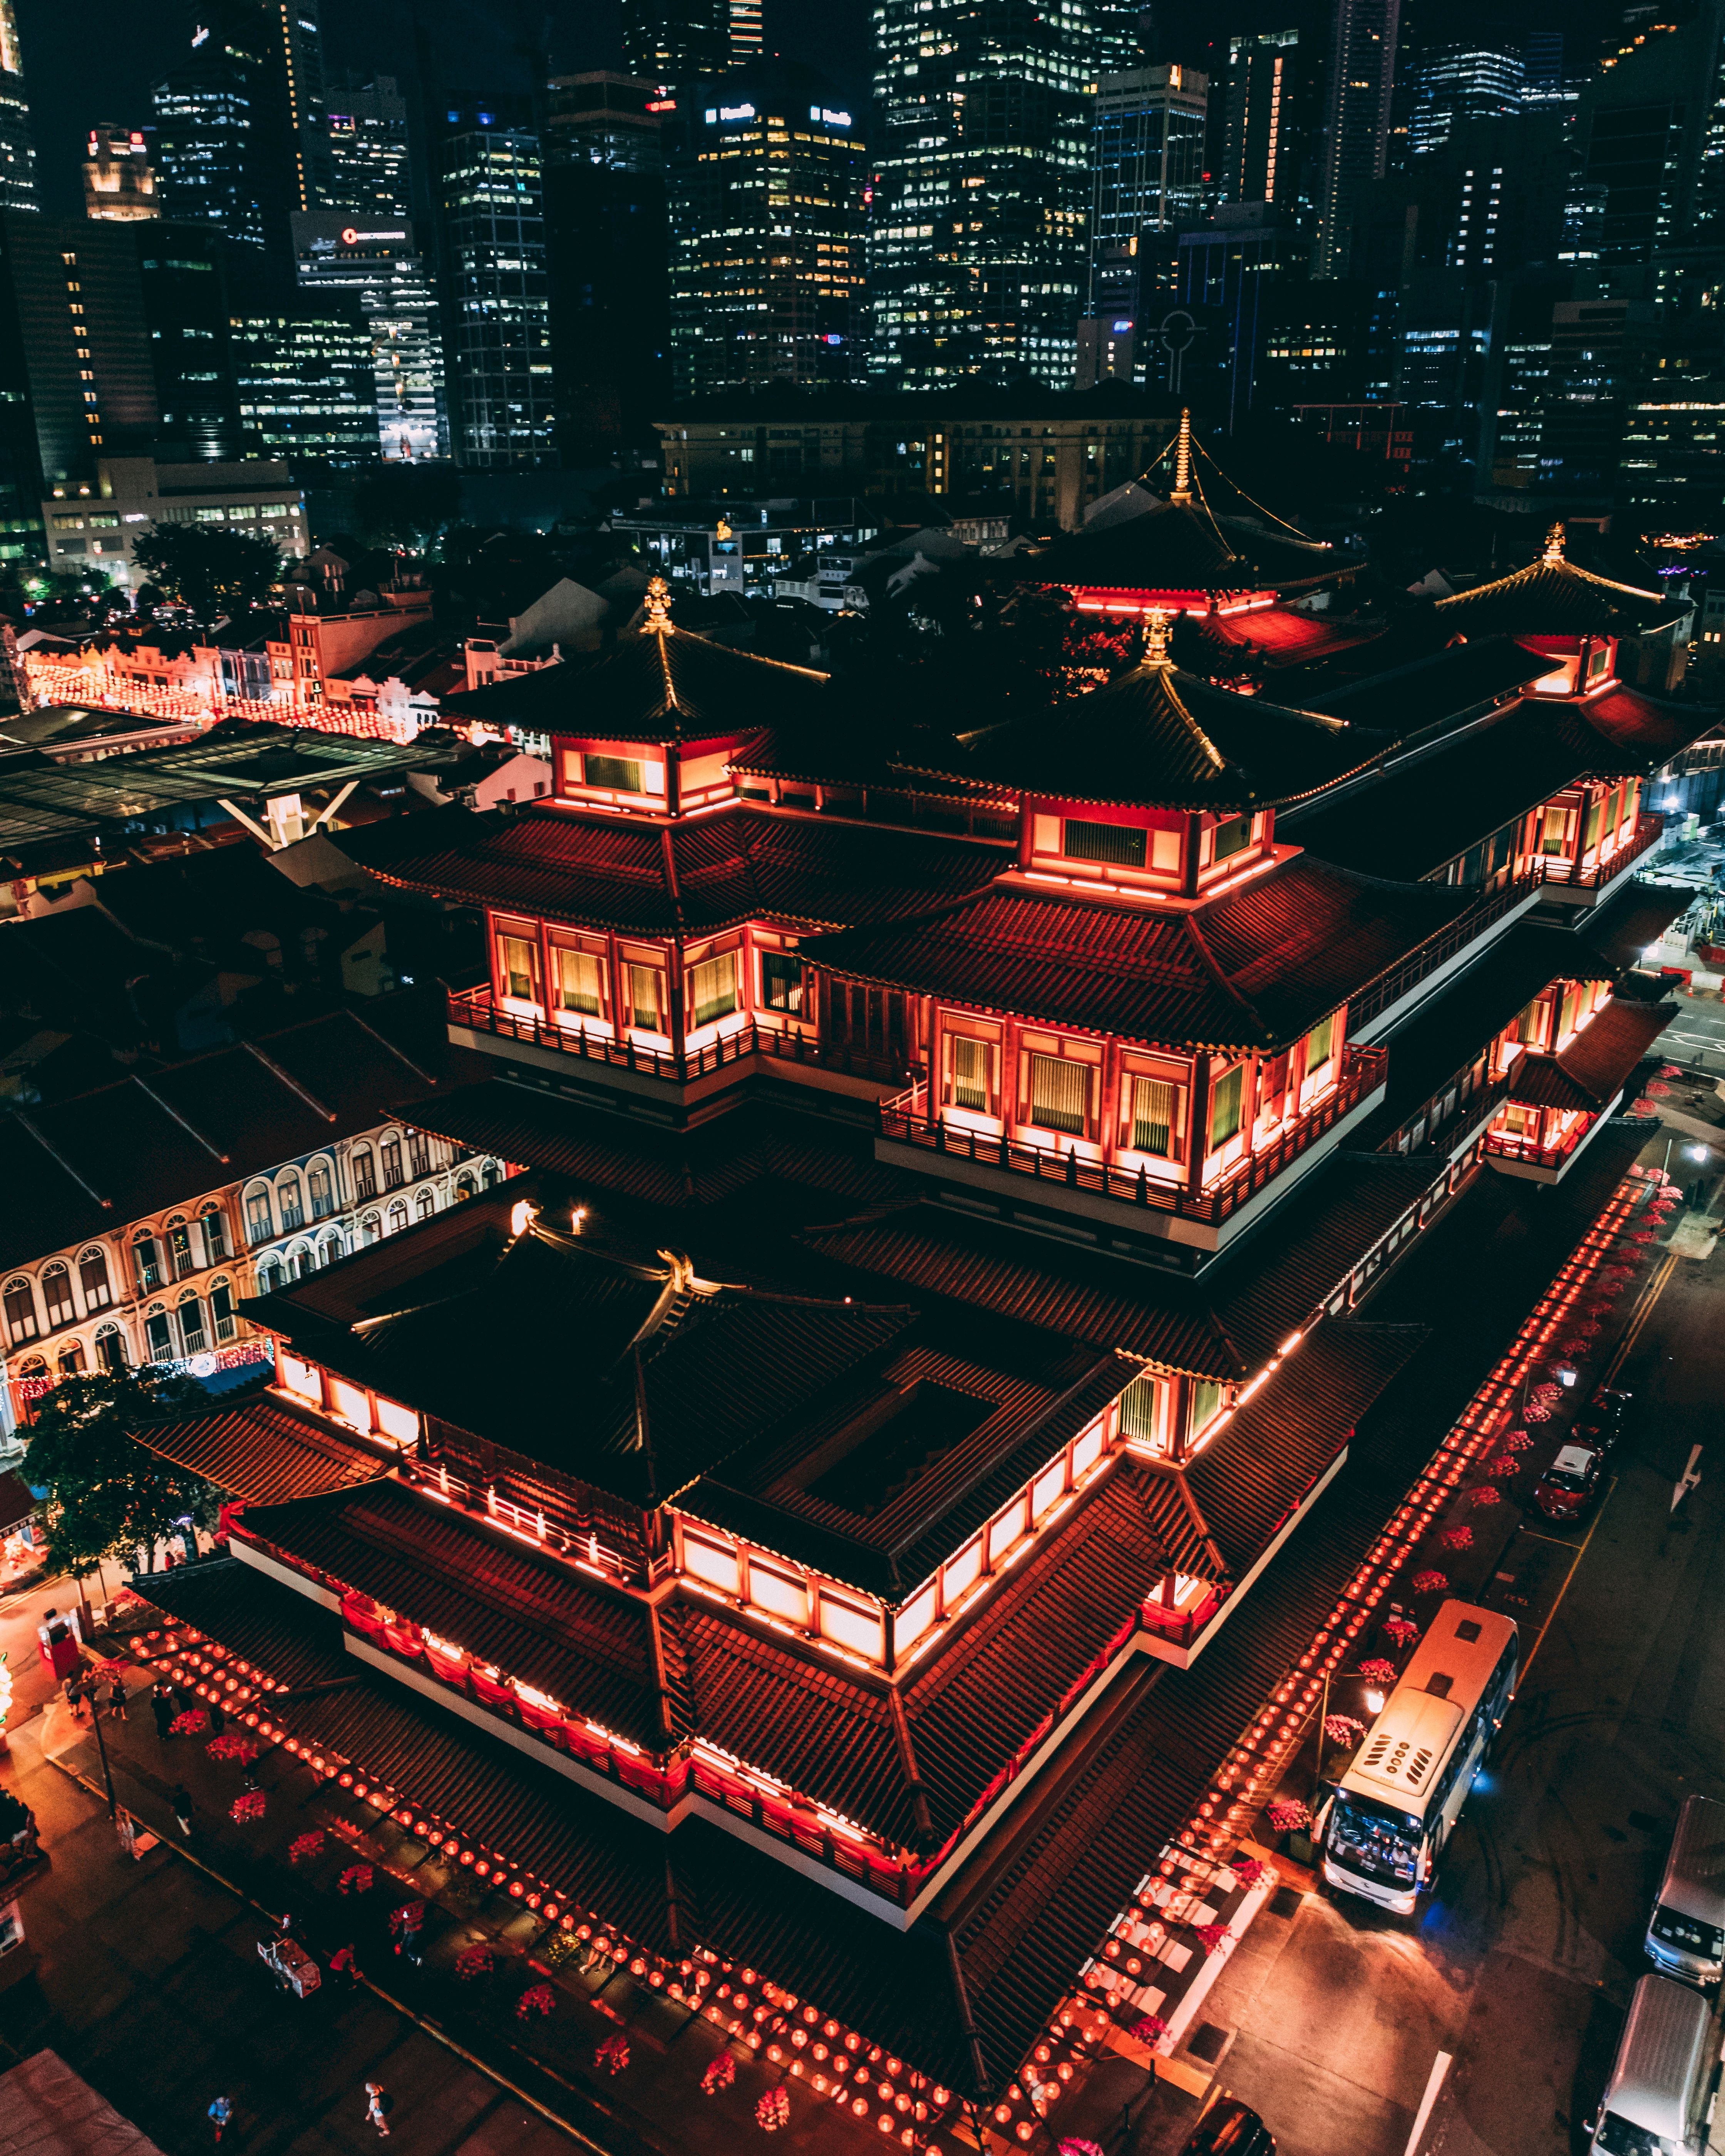 pagoda, cities, architecture, view from above, night city, roof, china, roofs cellphone